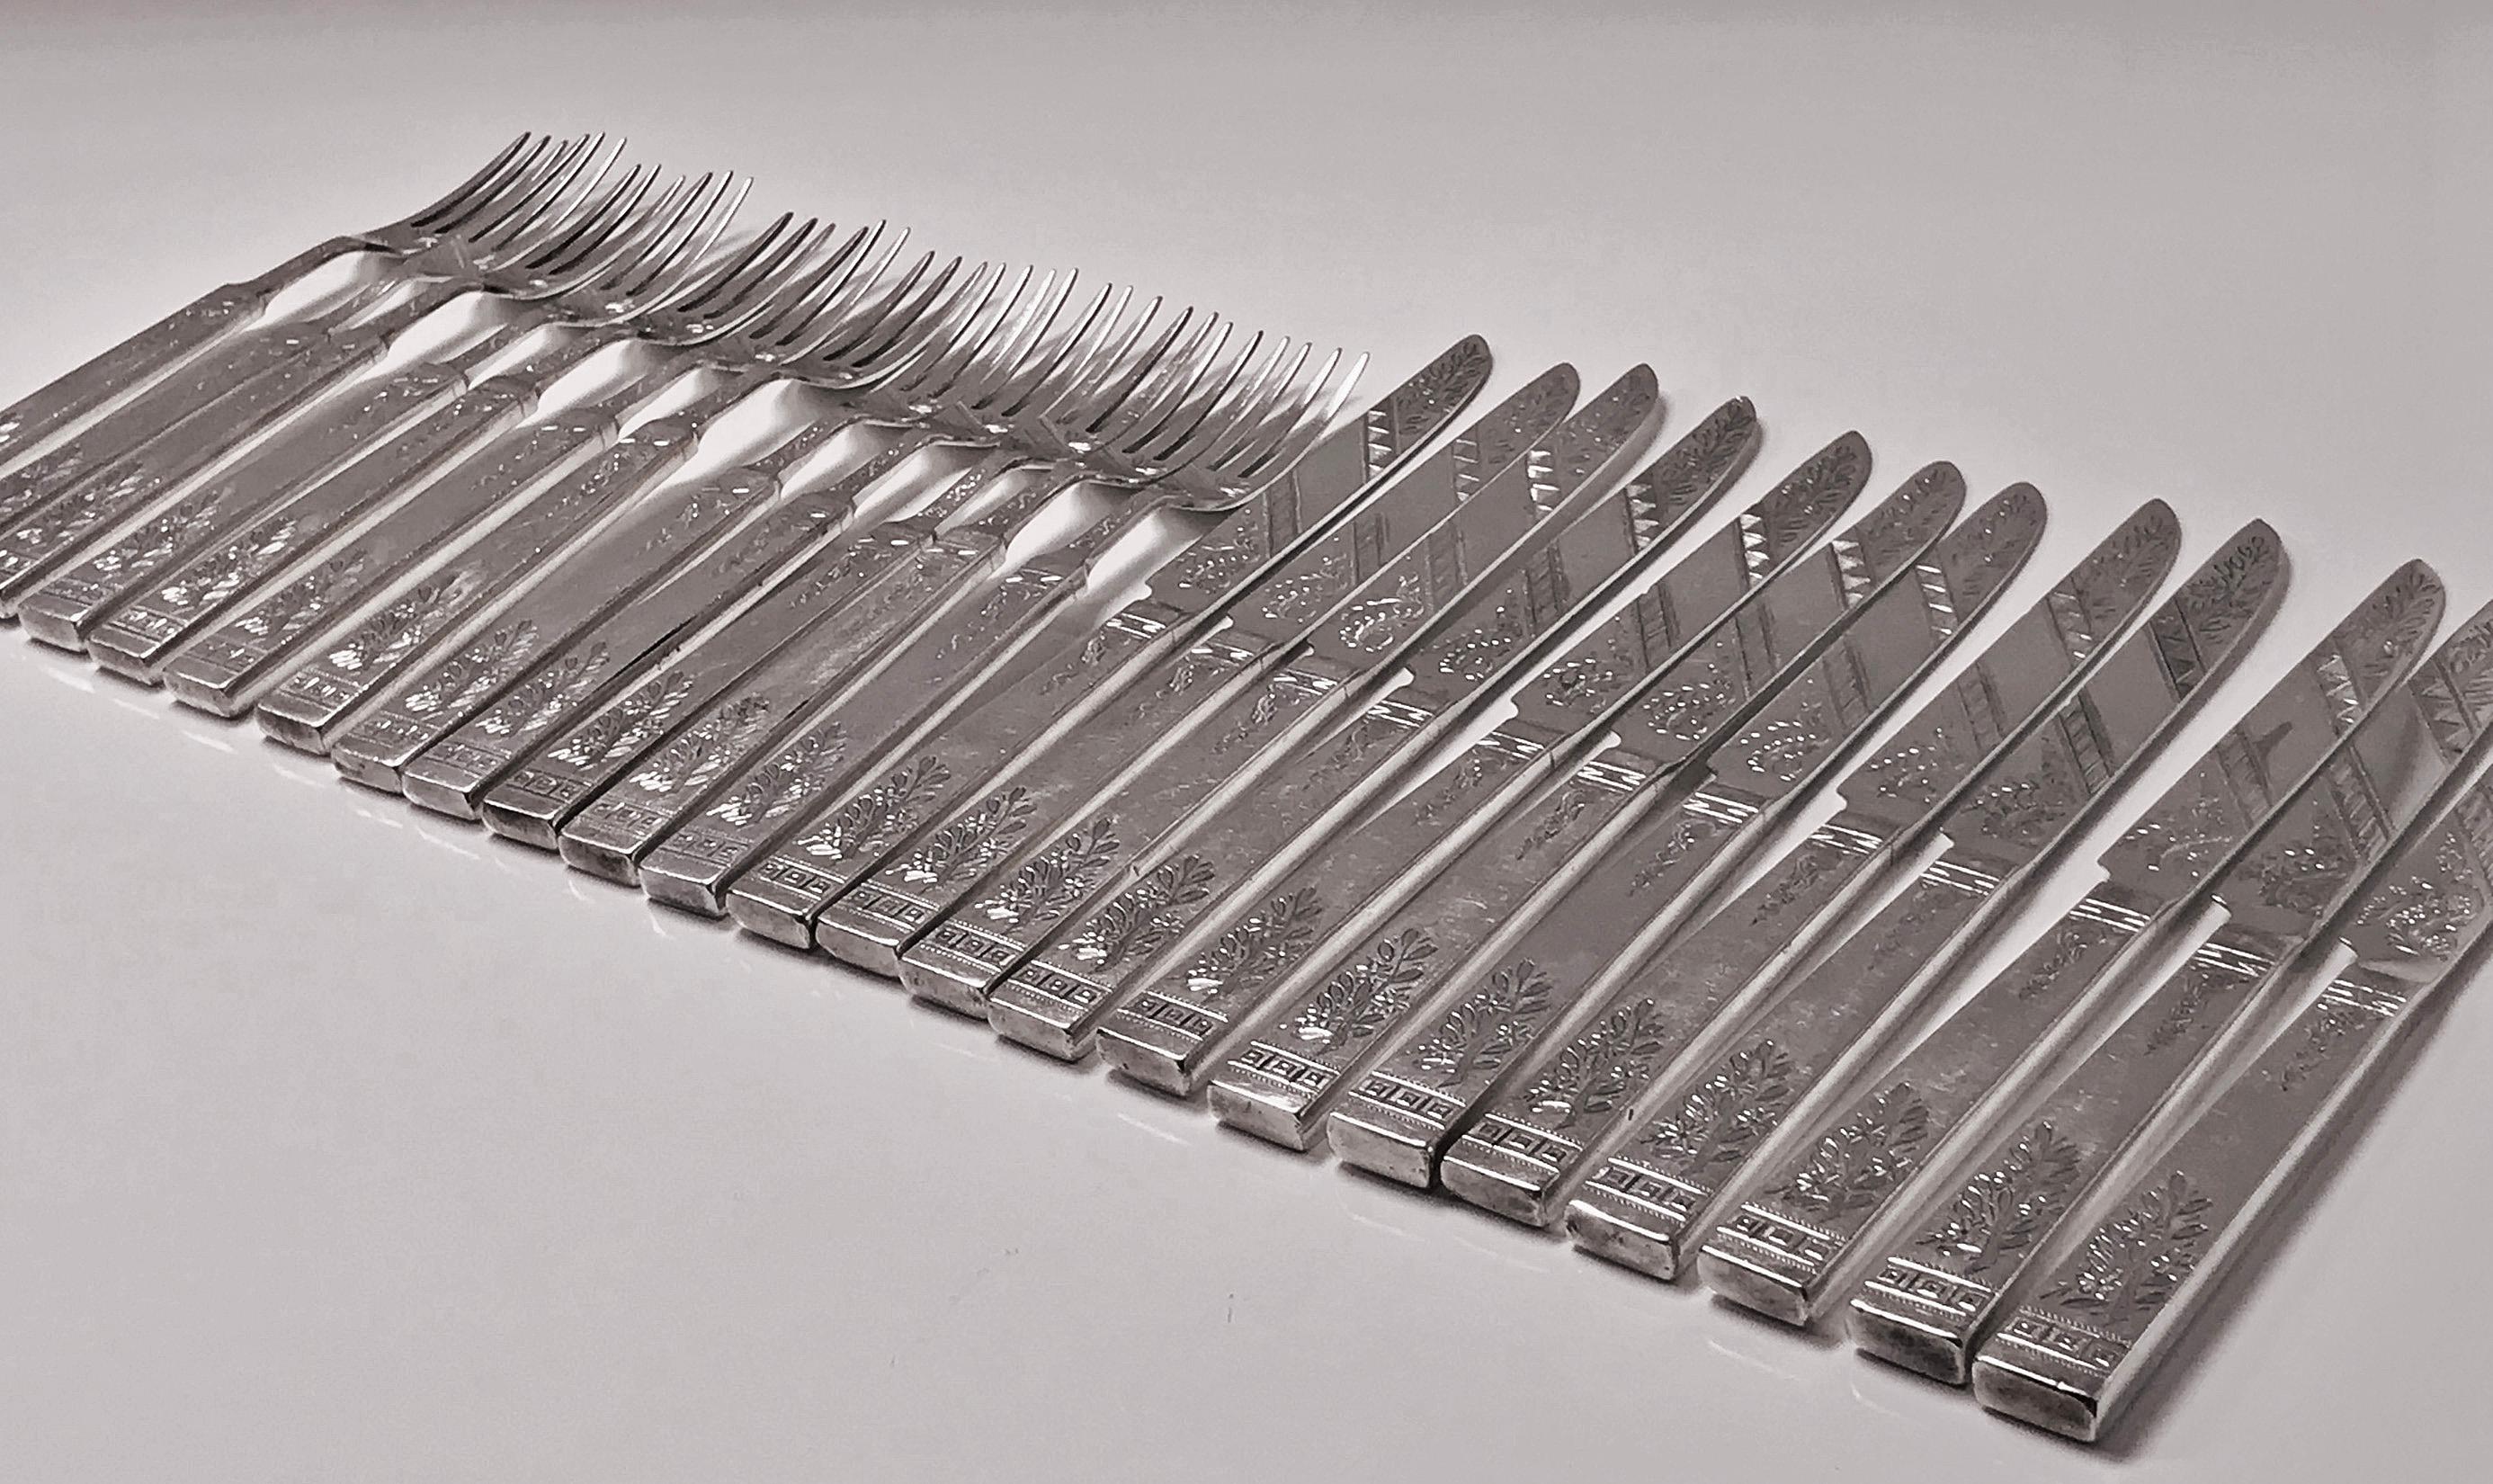 Set of 24 Antique English Silver Plate Lunch Dessert knives and forks, C.1853, Martin Hall & Co. The Service comprises 12 knives and 12 forks, tapered quadrilateral handles; the handles, tines and blades all engraved with stylised foliate, wriggle